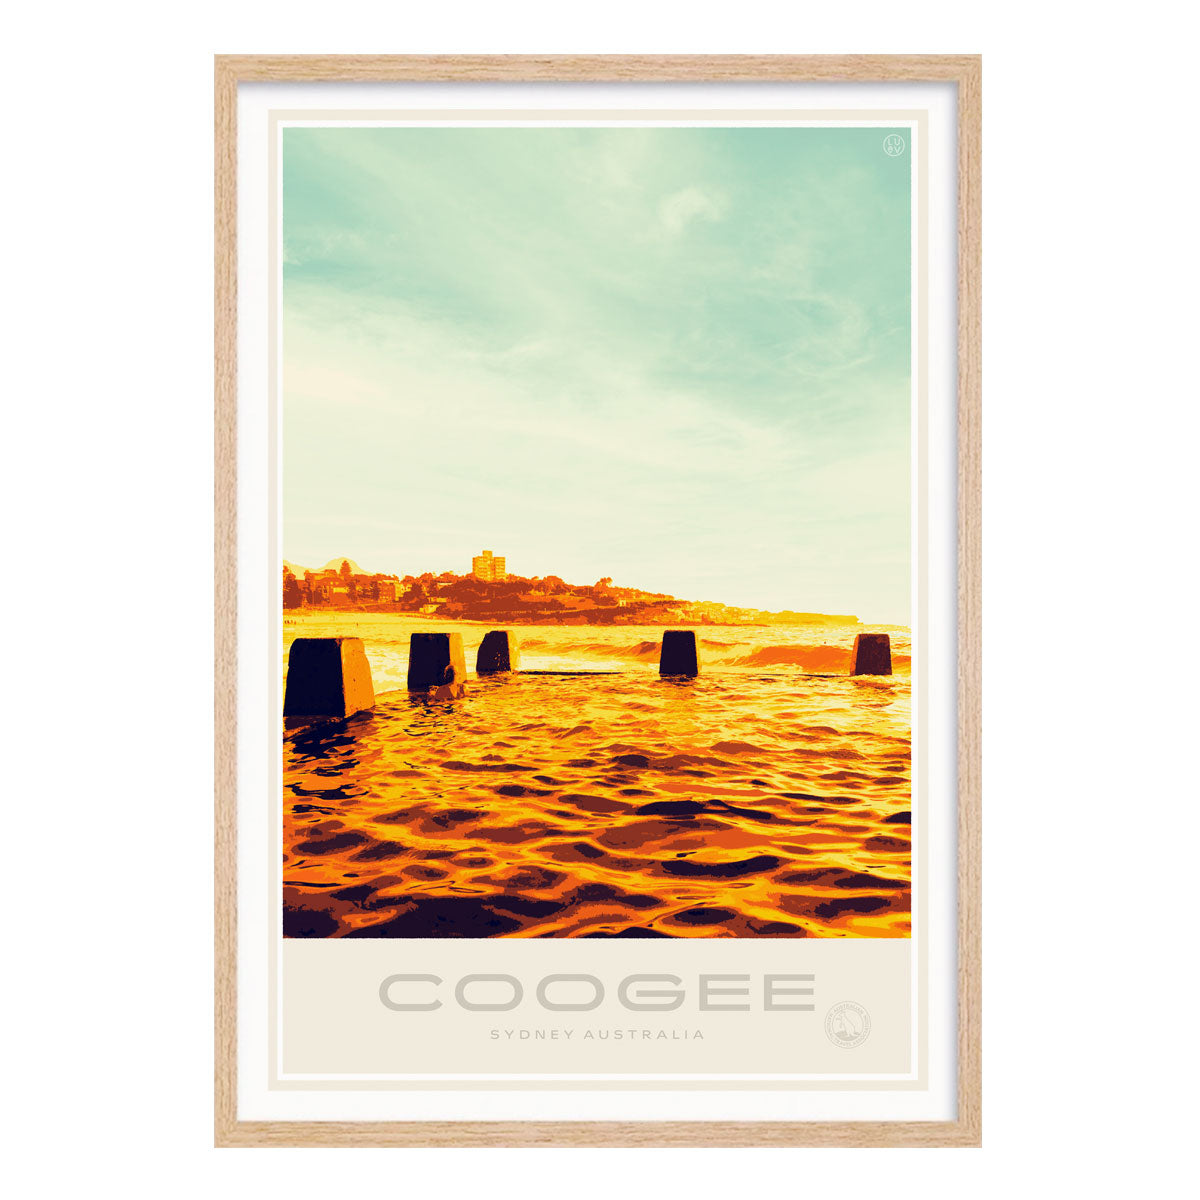 Coogee Pool Sydney vintage travel style poster print in oak frame by places we luv